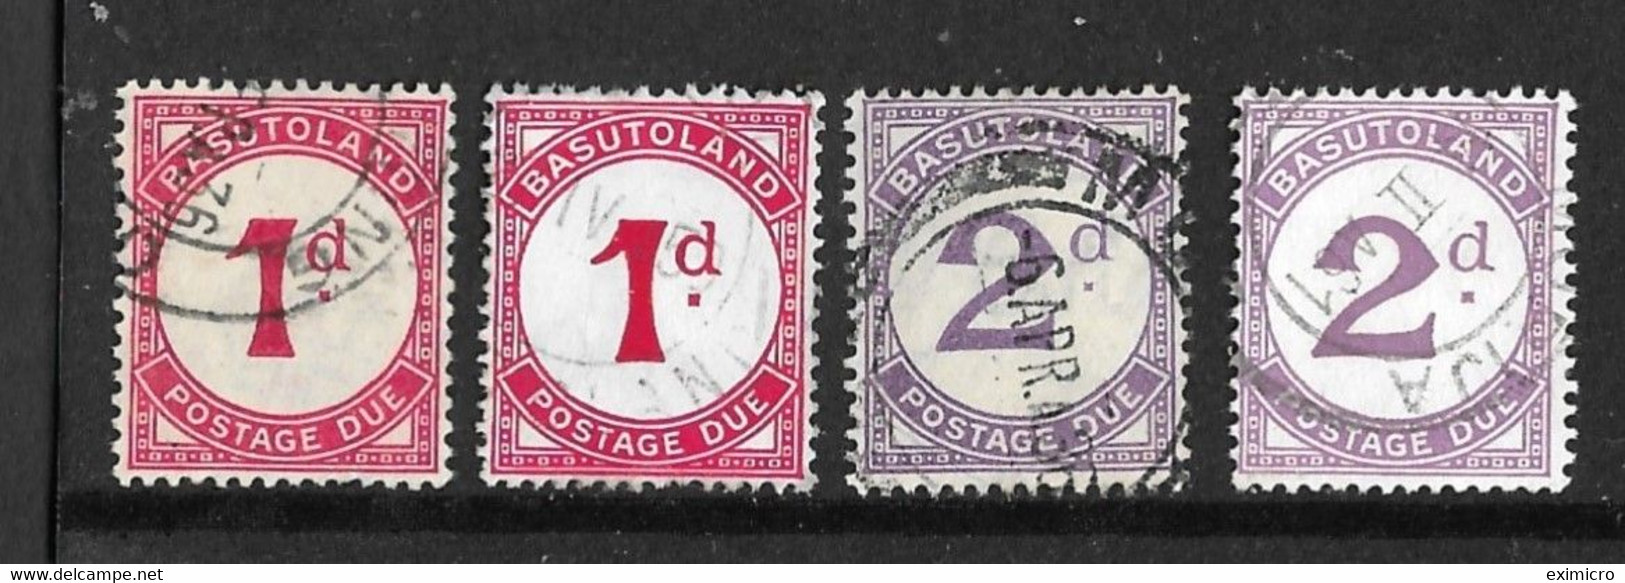 BASUTOLAND 1933 - 1952 POSTAGE DUE SET SG D1, D1b, D2, D2a BOTH ORDINARY AND CHALK-SURFACED PAPERS FINE USED Cat £92 - Timbres-taxe